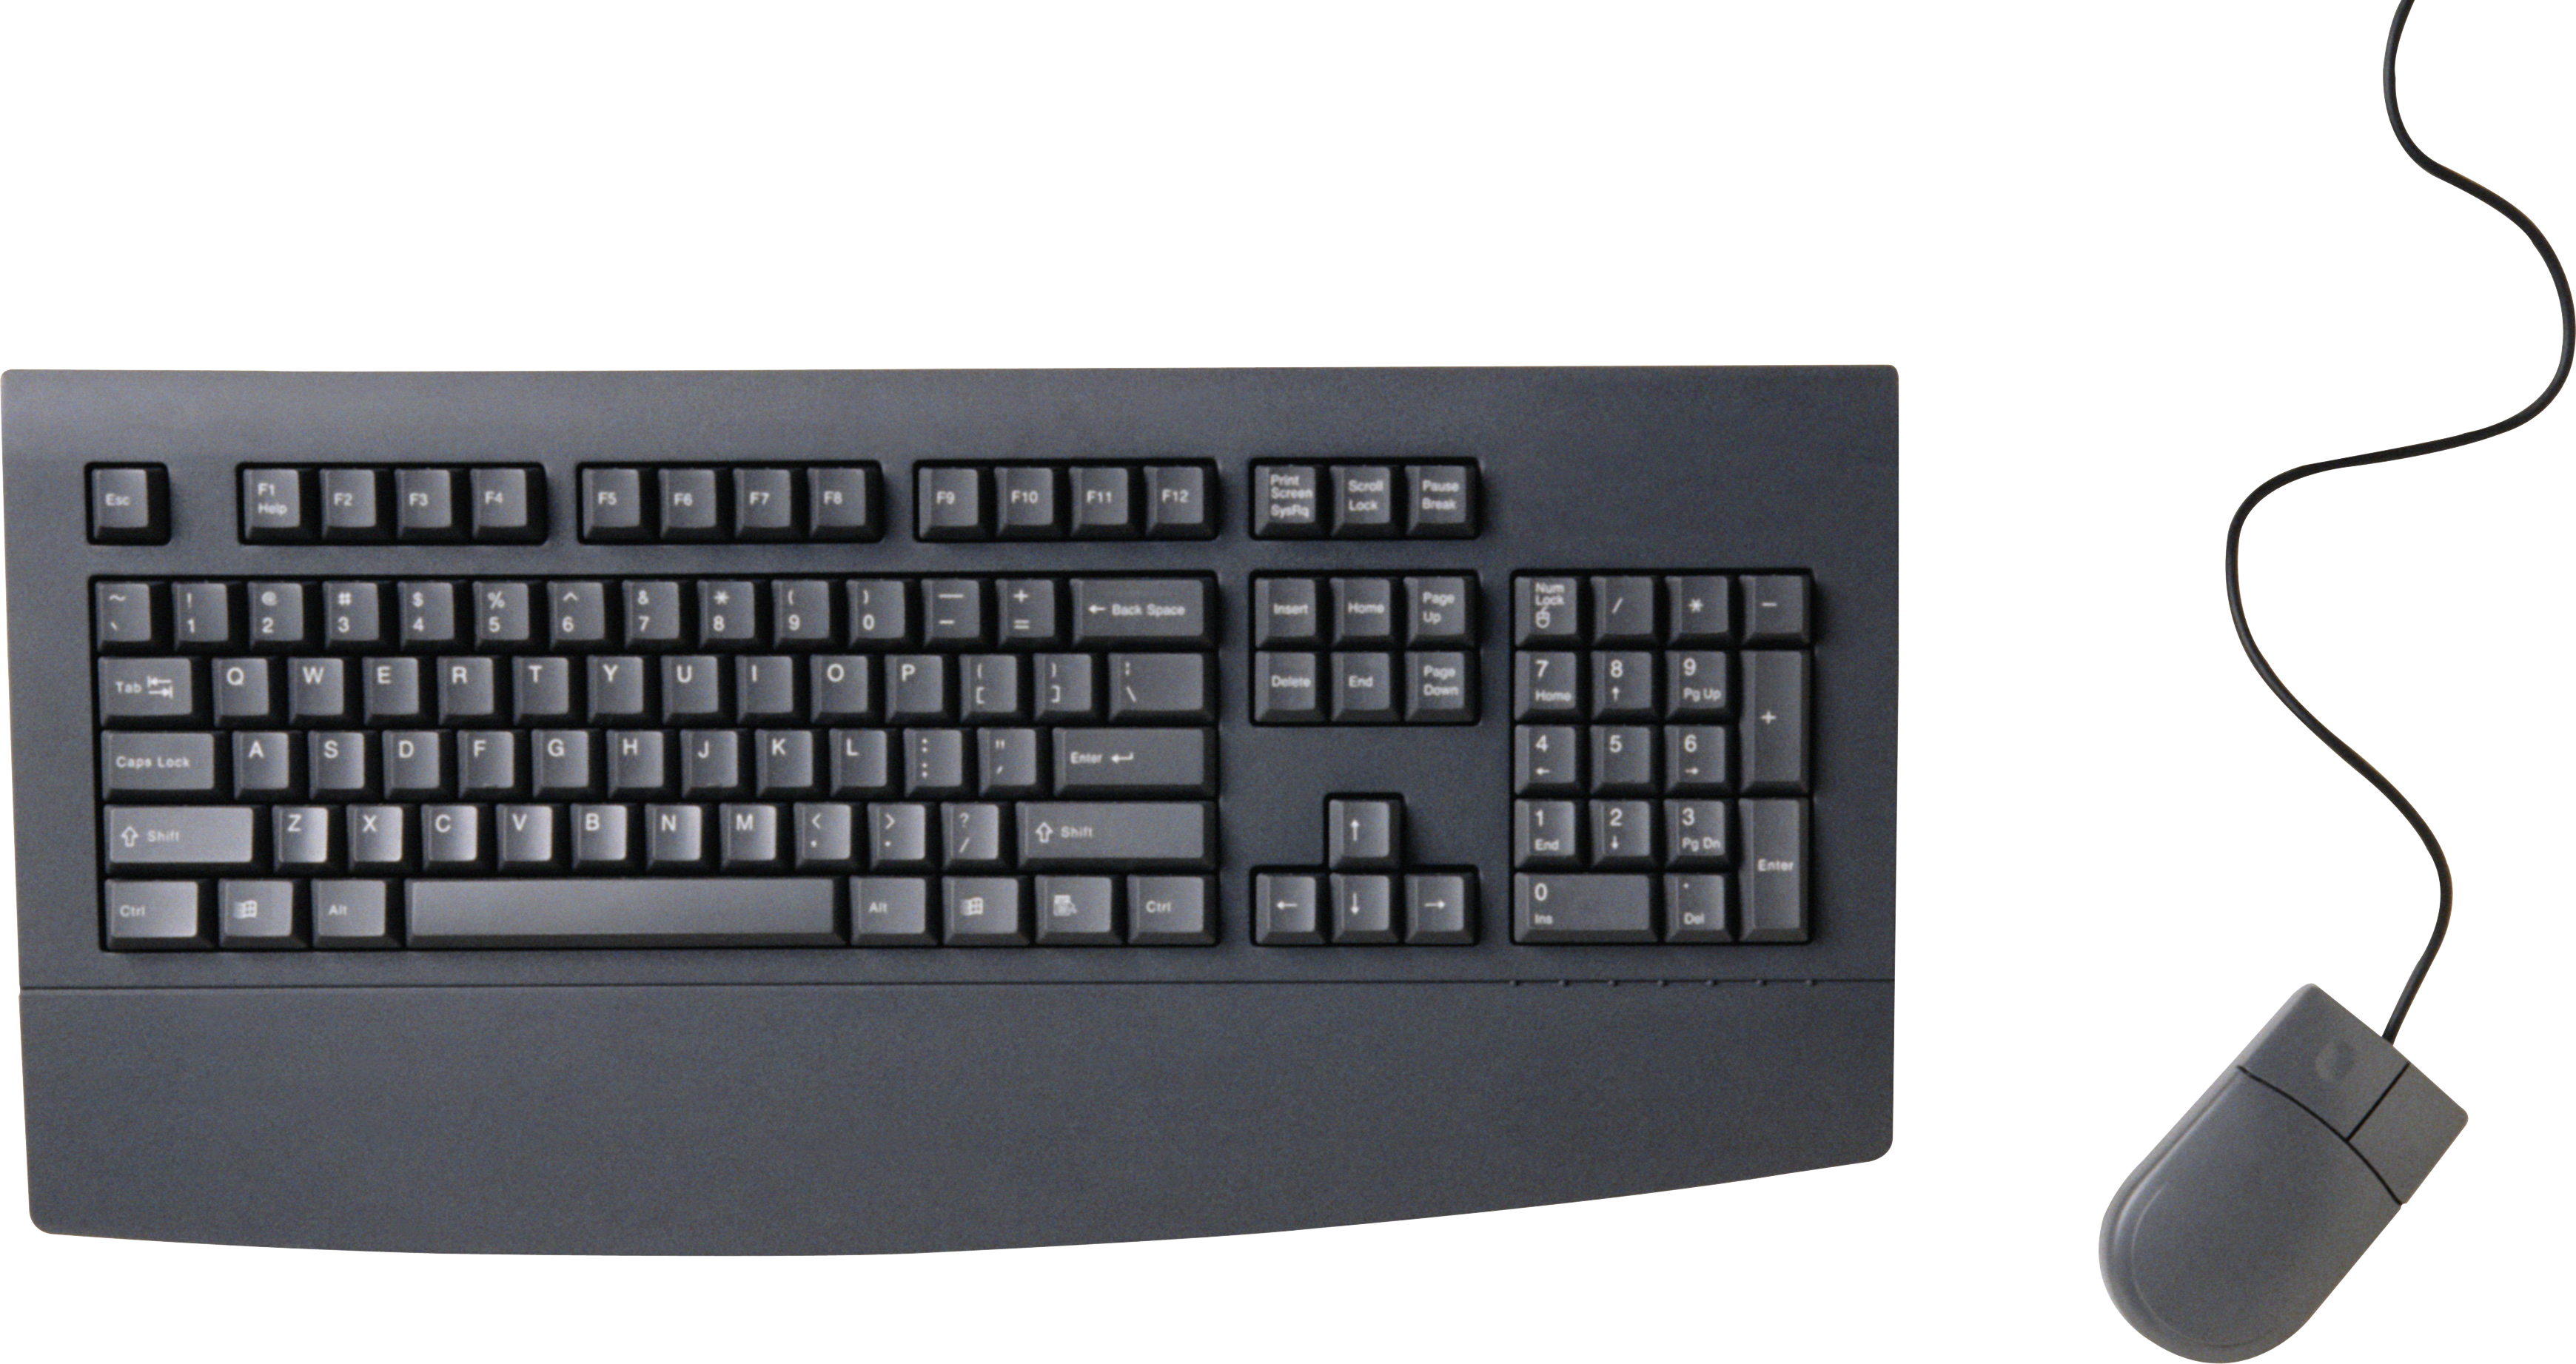 mouse clipart computer keyboard